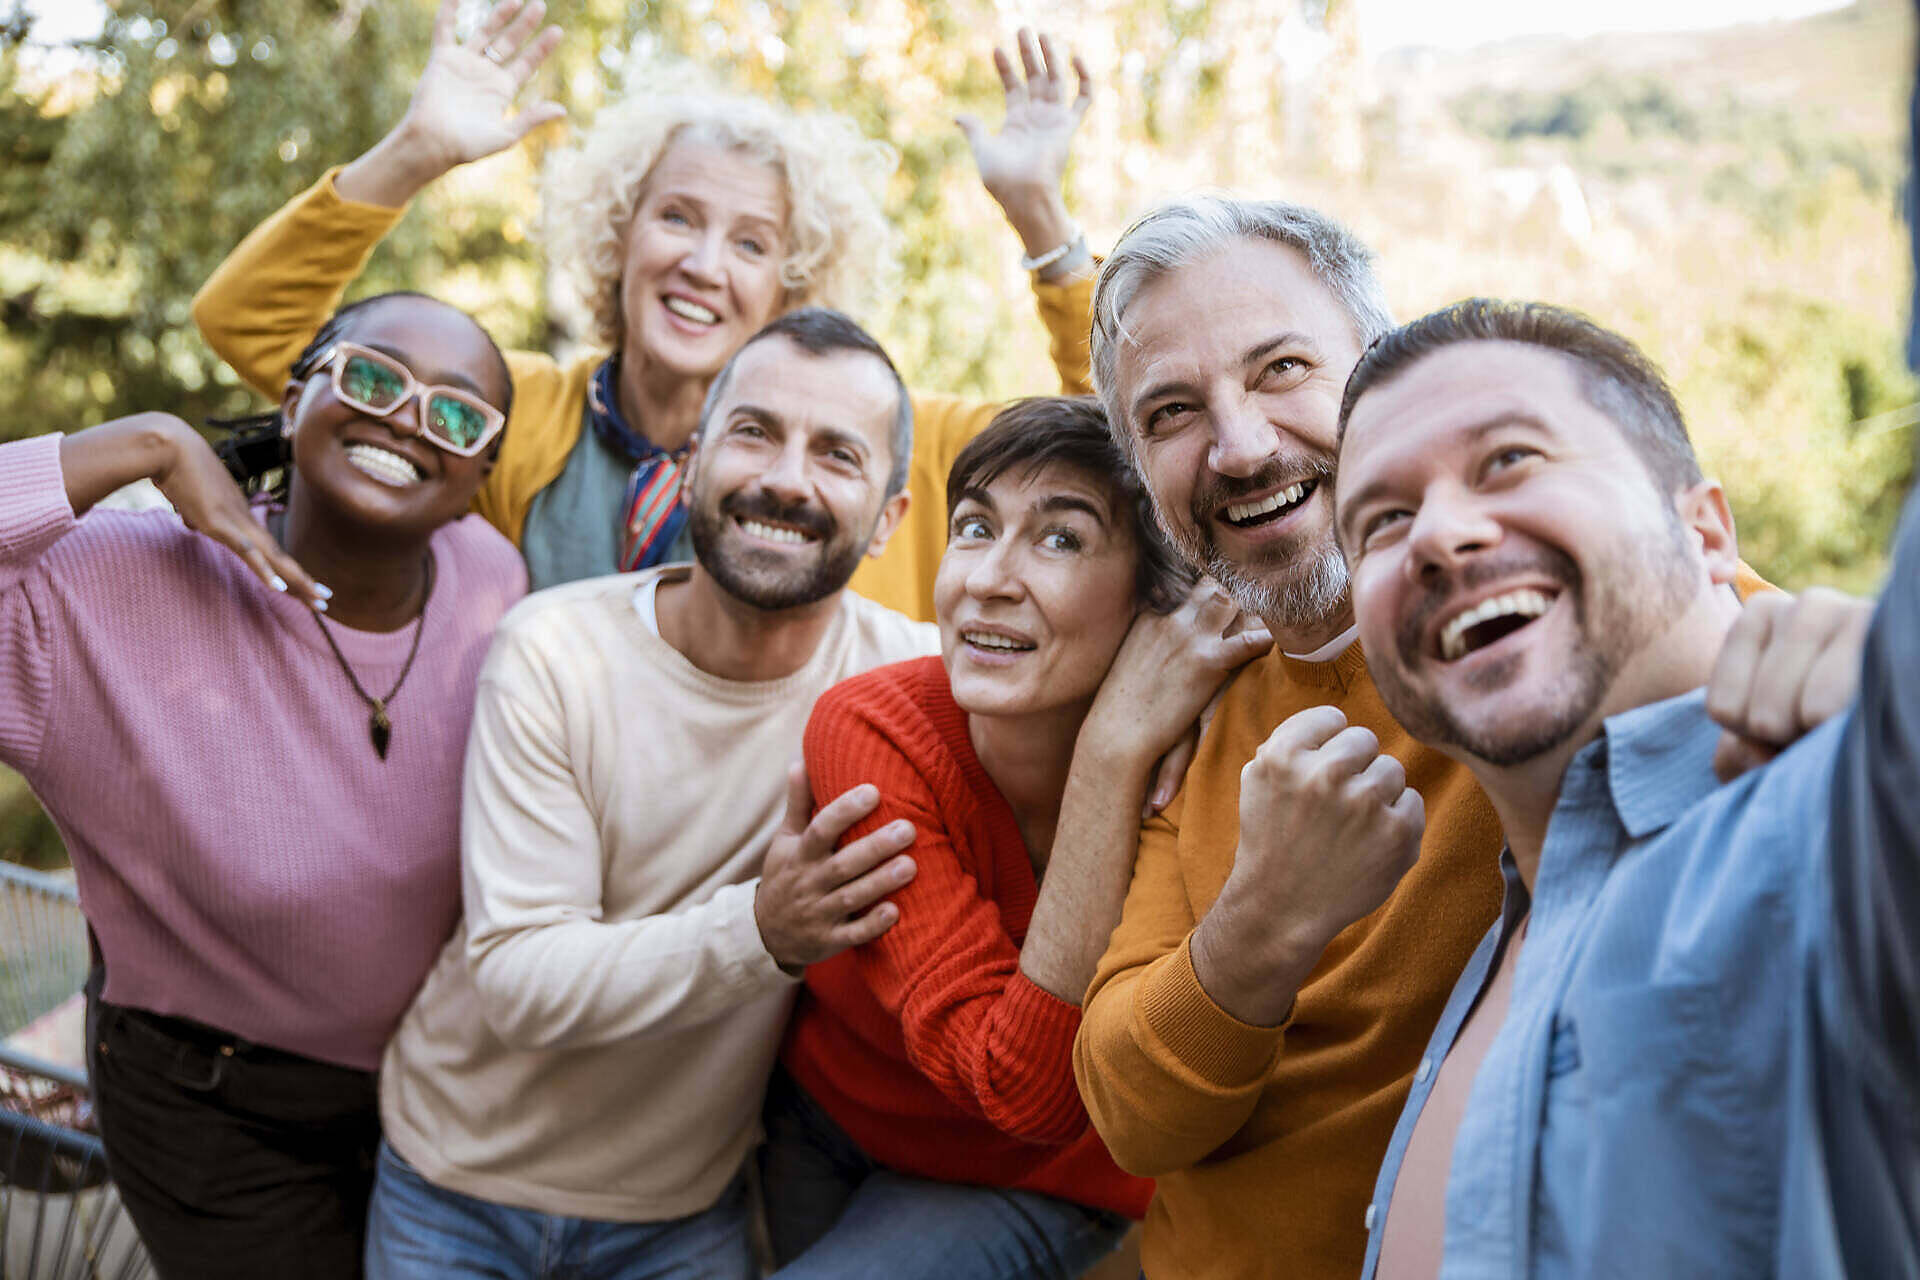 Diverse group of smiling people in colorful clothing embracing and celebrating, representing support and community in addiction recovery